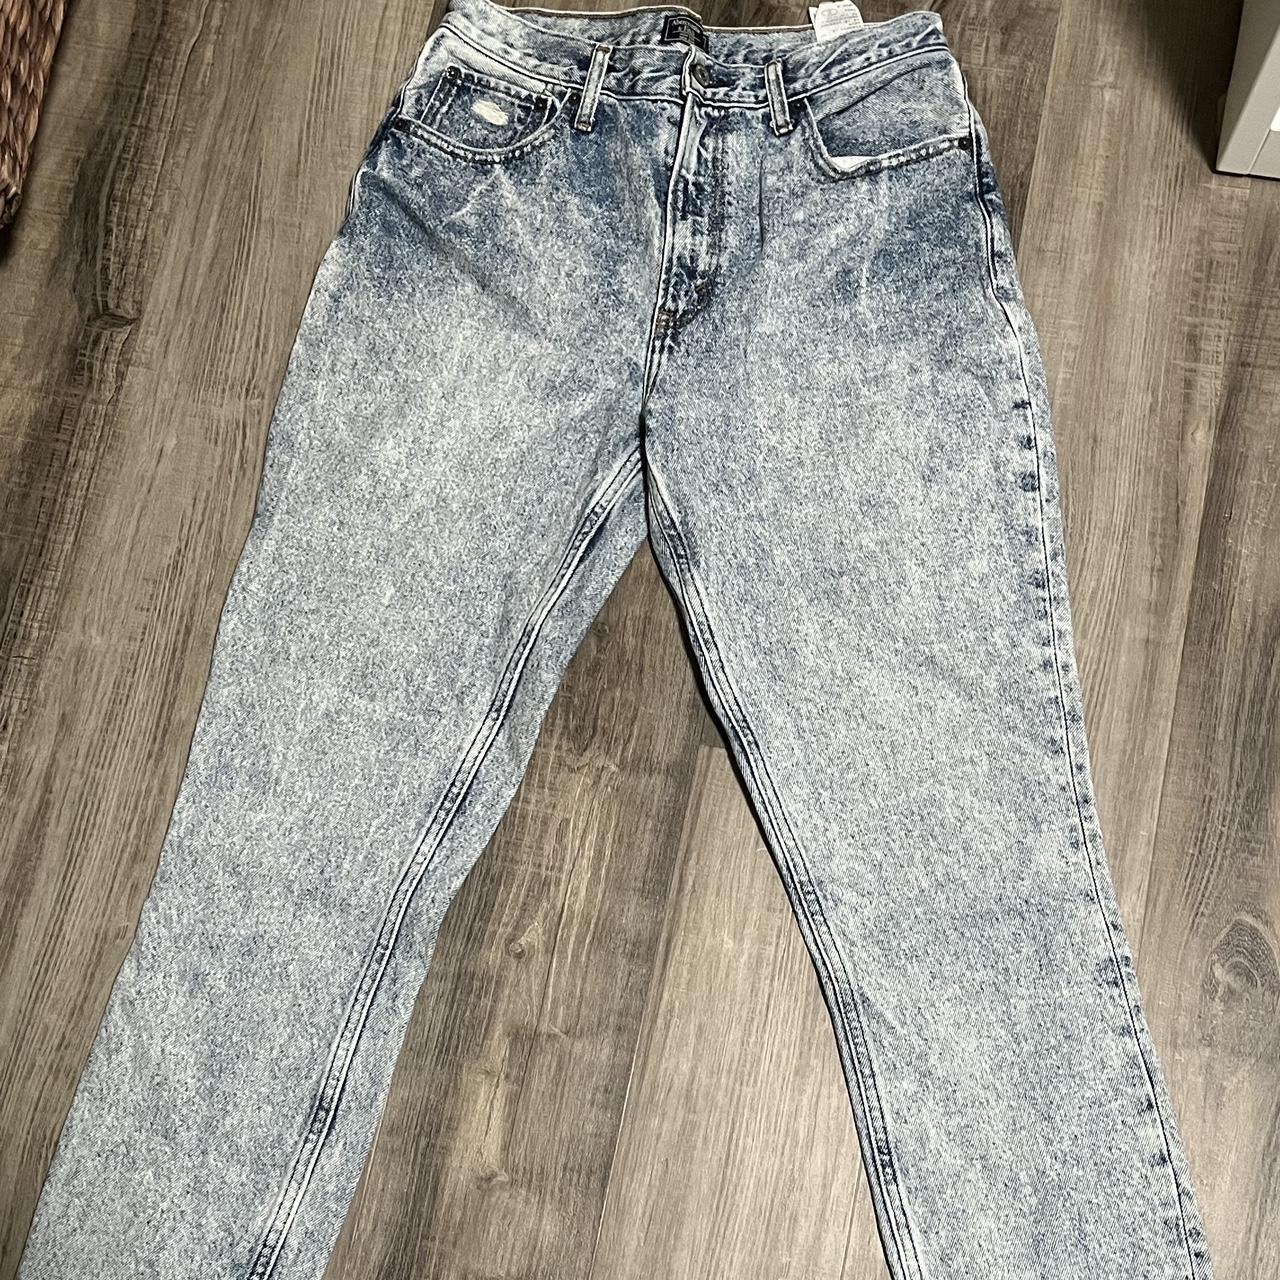 Really cute high quality stone washed jeans. Very... - Depop